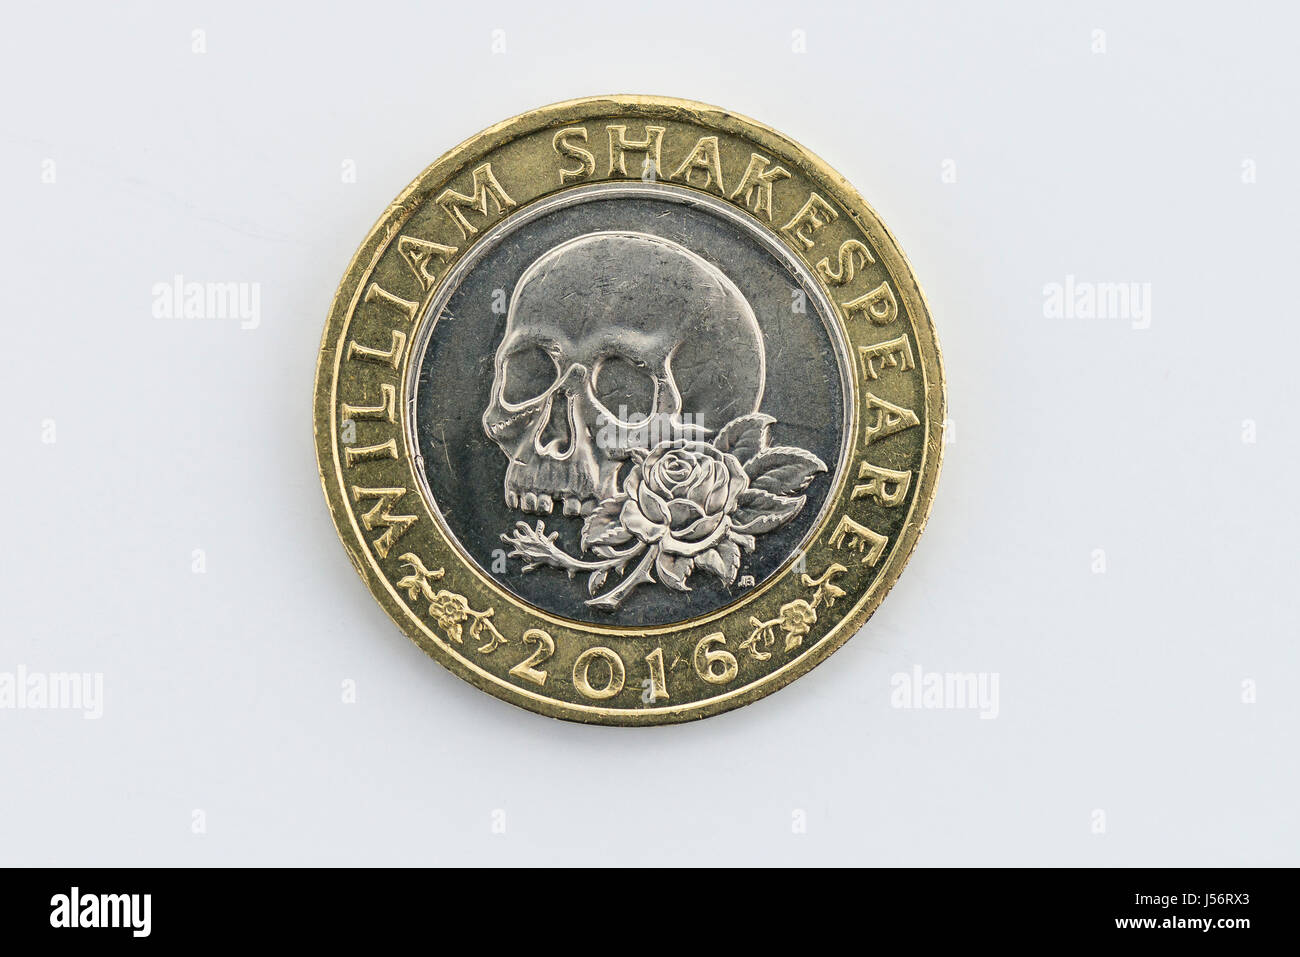 The tails side of a 2016 commemorative £2 coin to mark the anniversary of the death of William Shakespeare Stock Photo